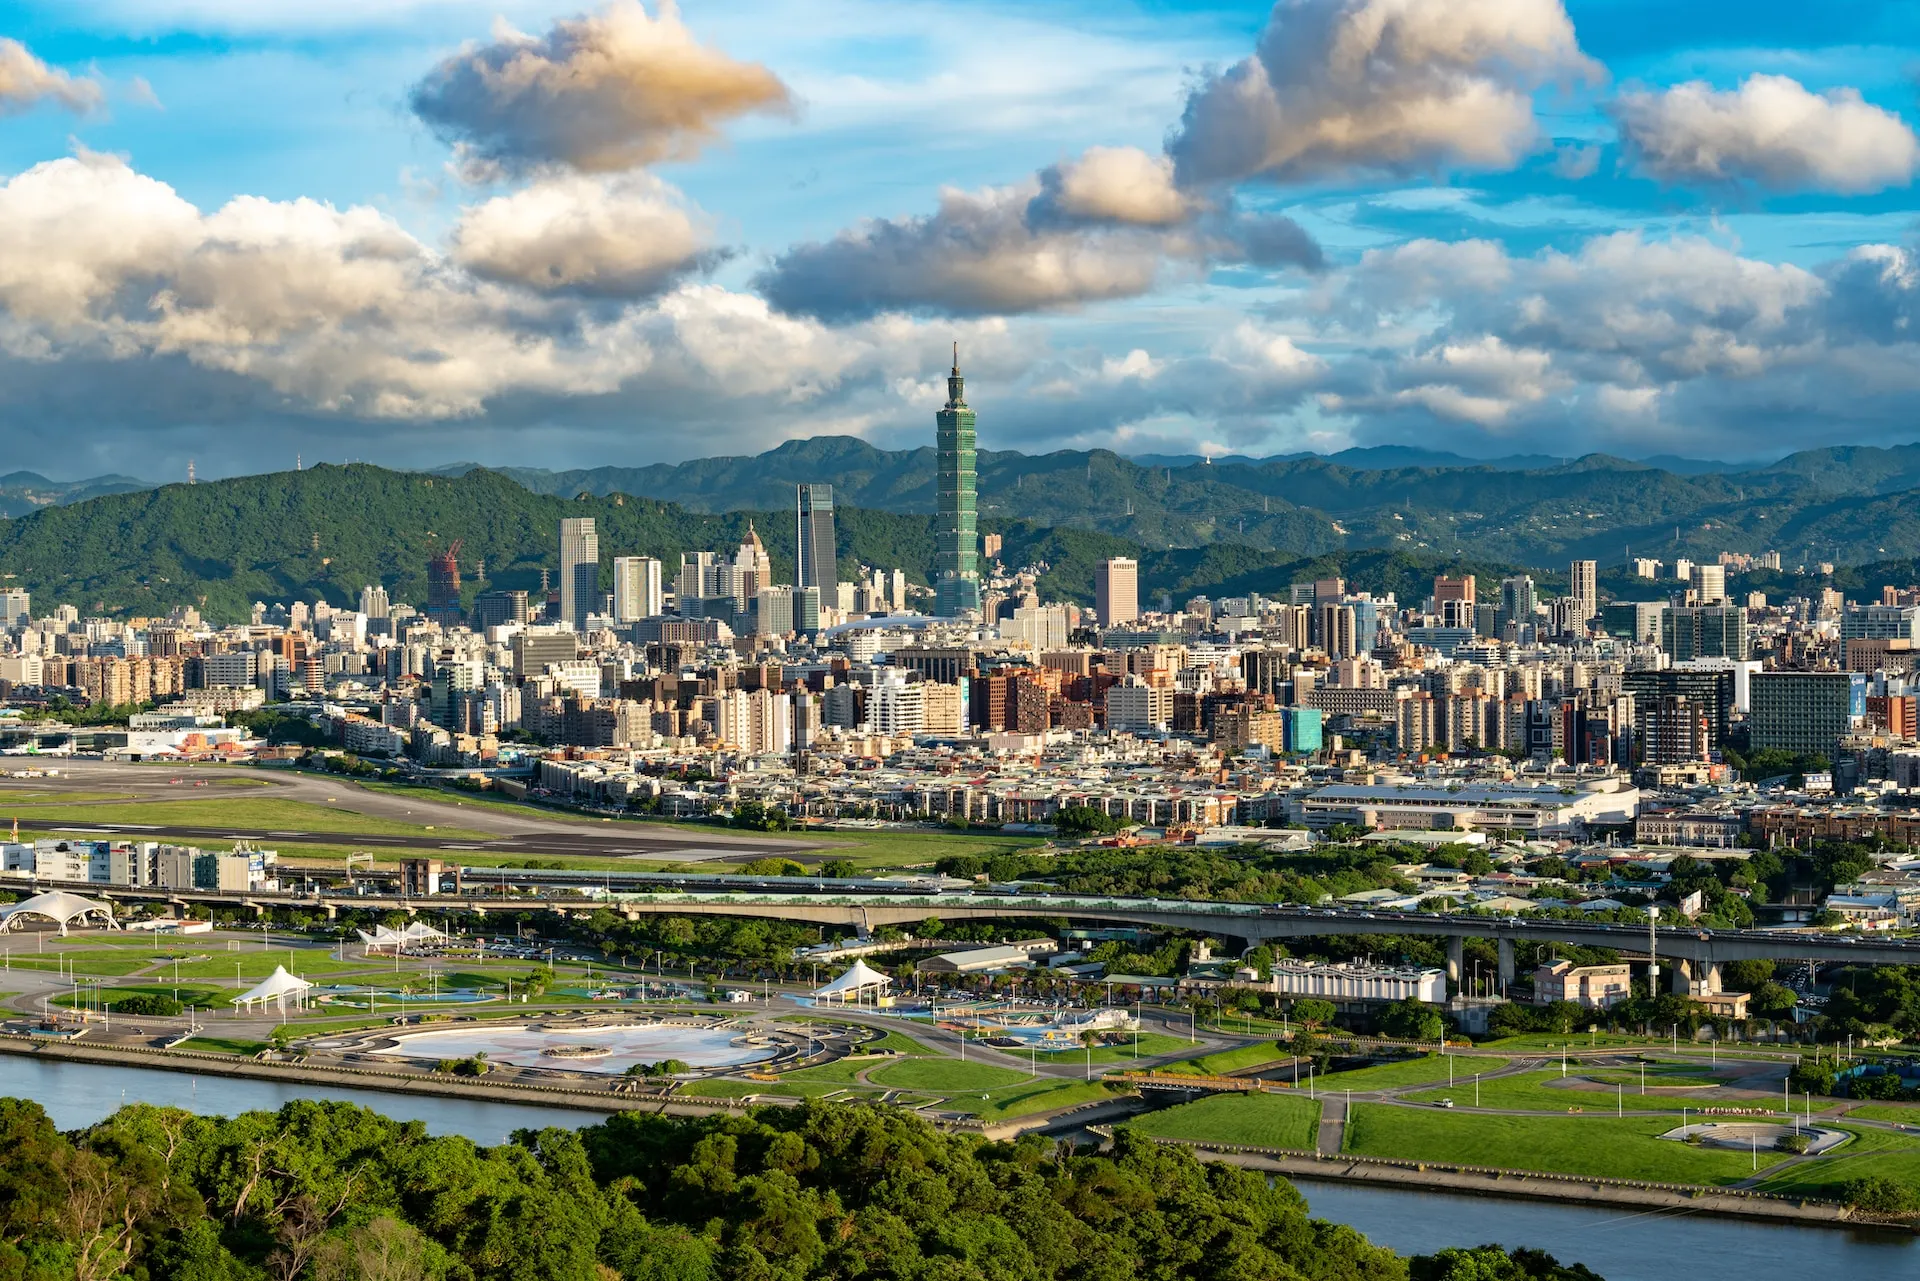 Aerial view of Taipei, Source: Photo by Timo Volz on Unsplash